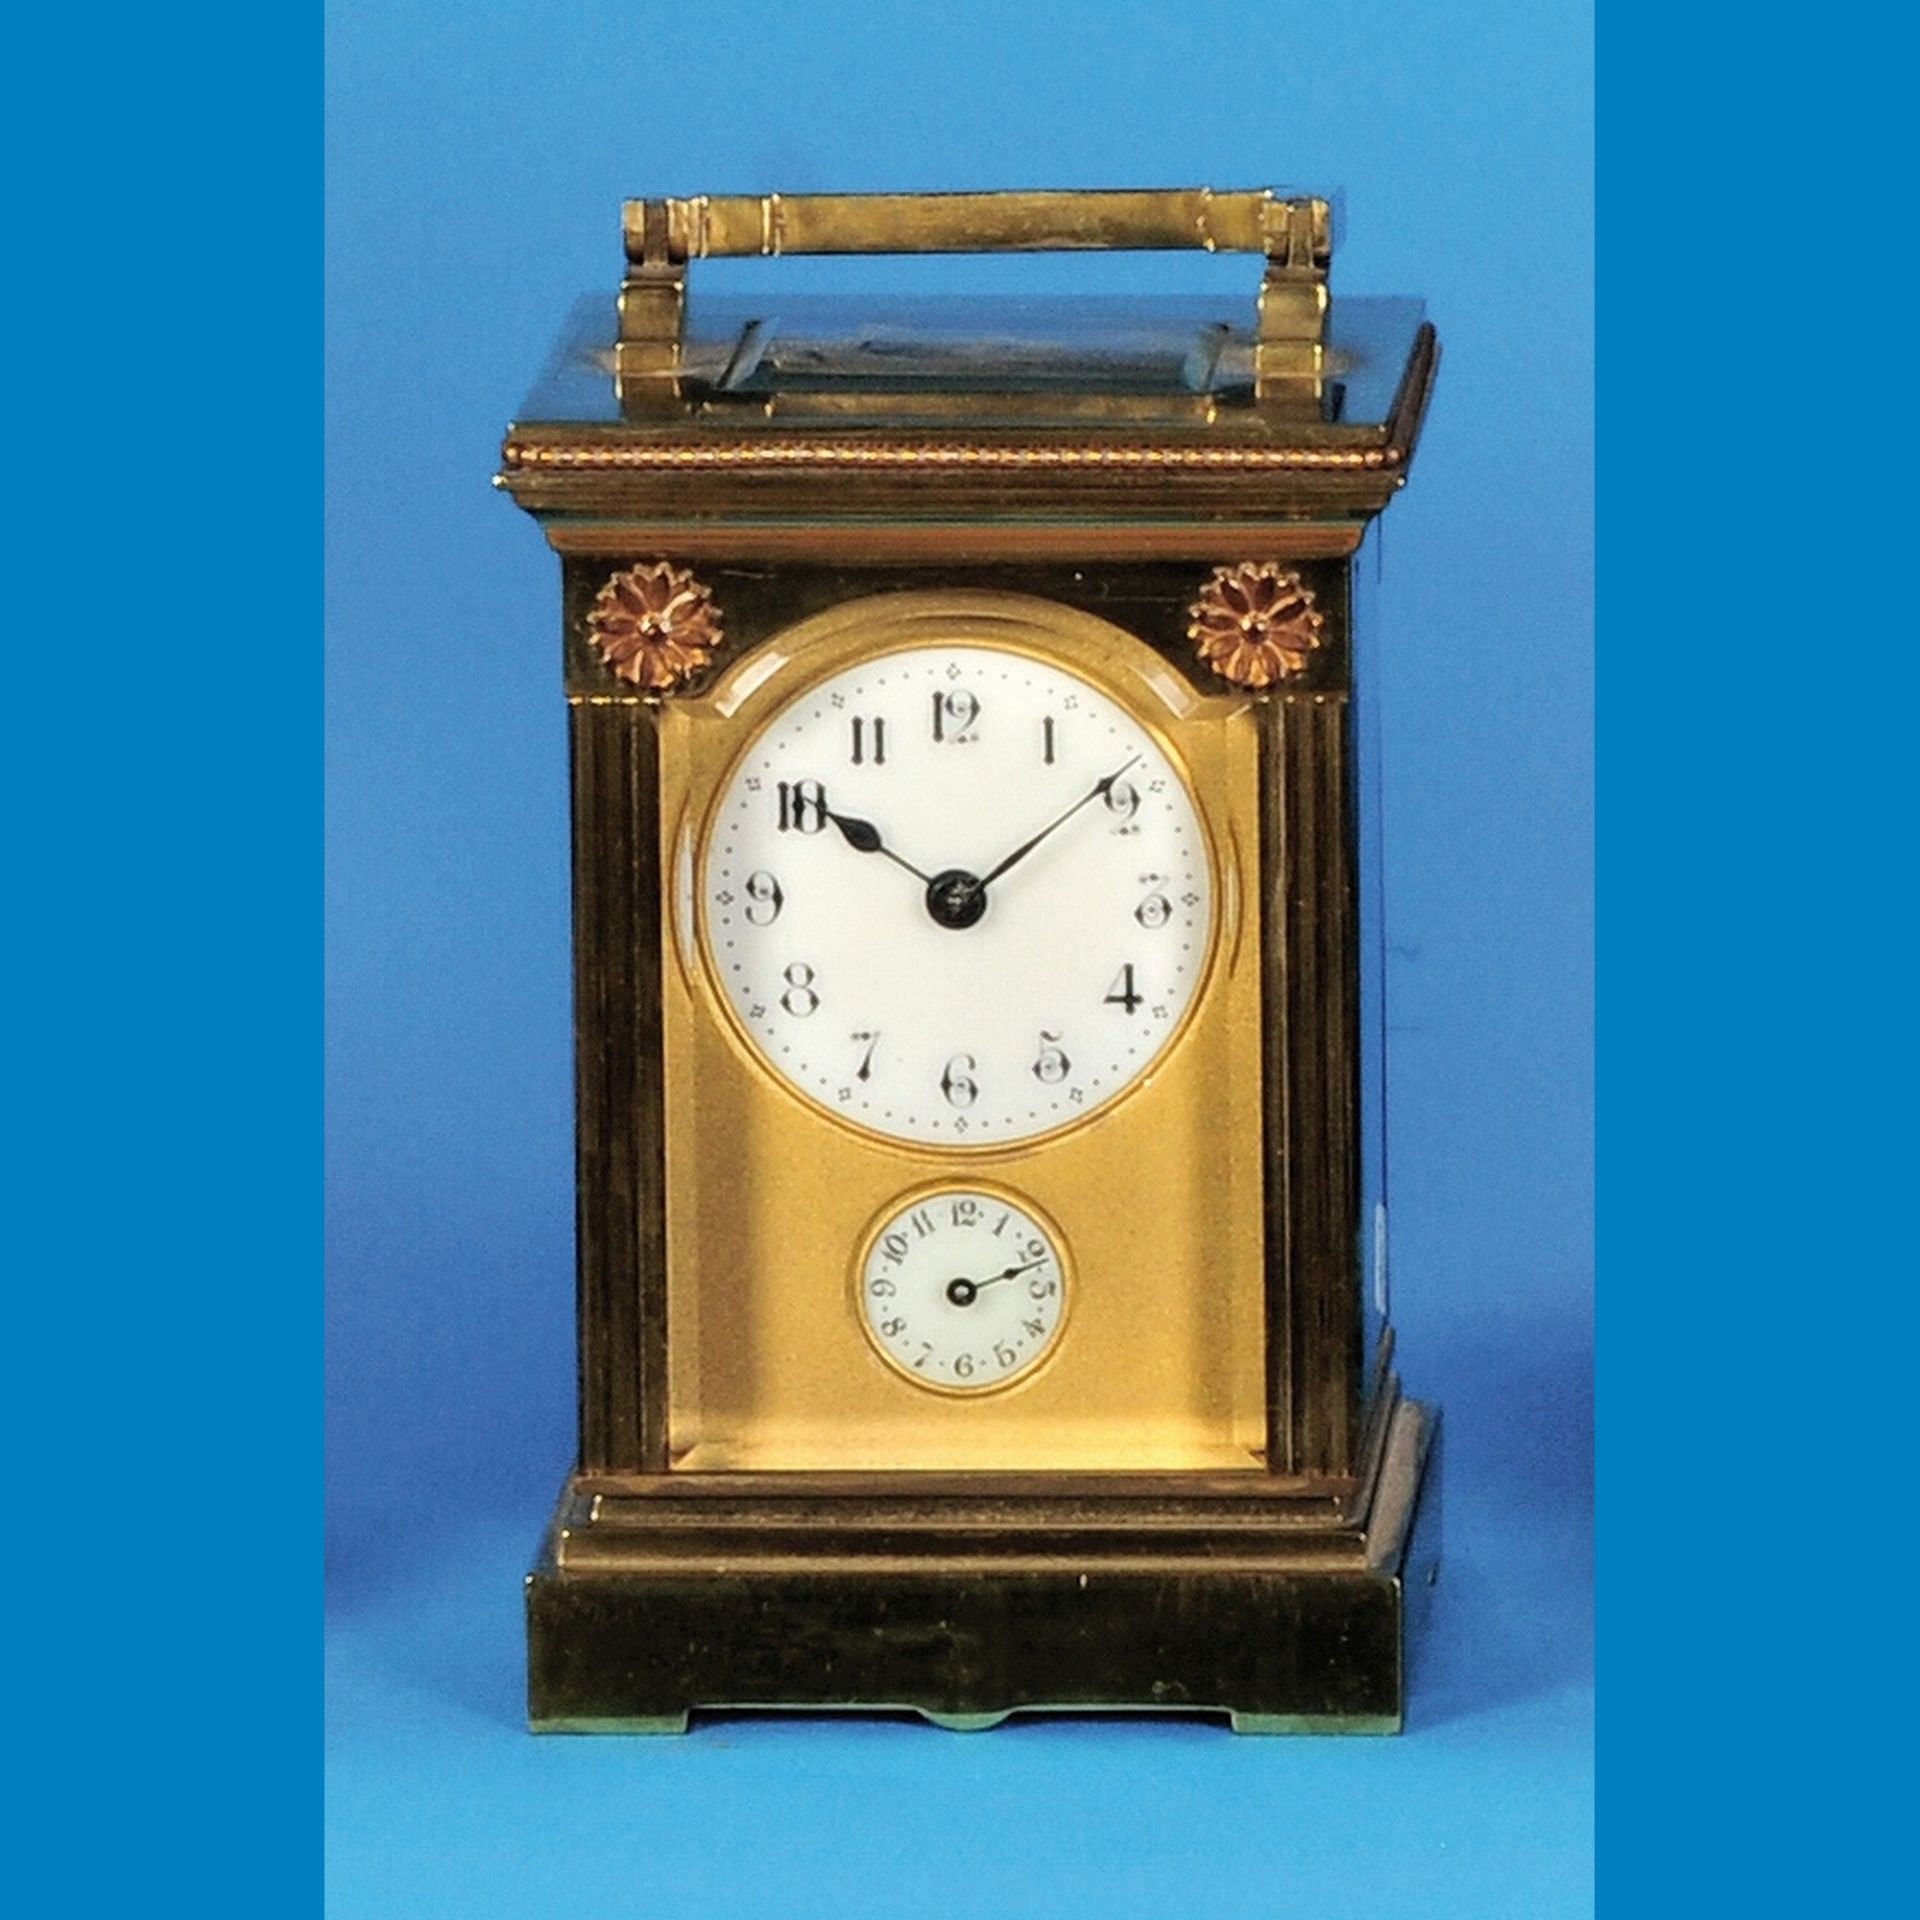 English travel clock with alarm clock and cylinder echappement